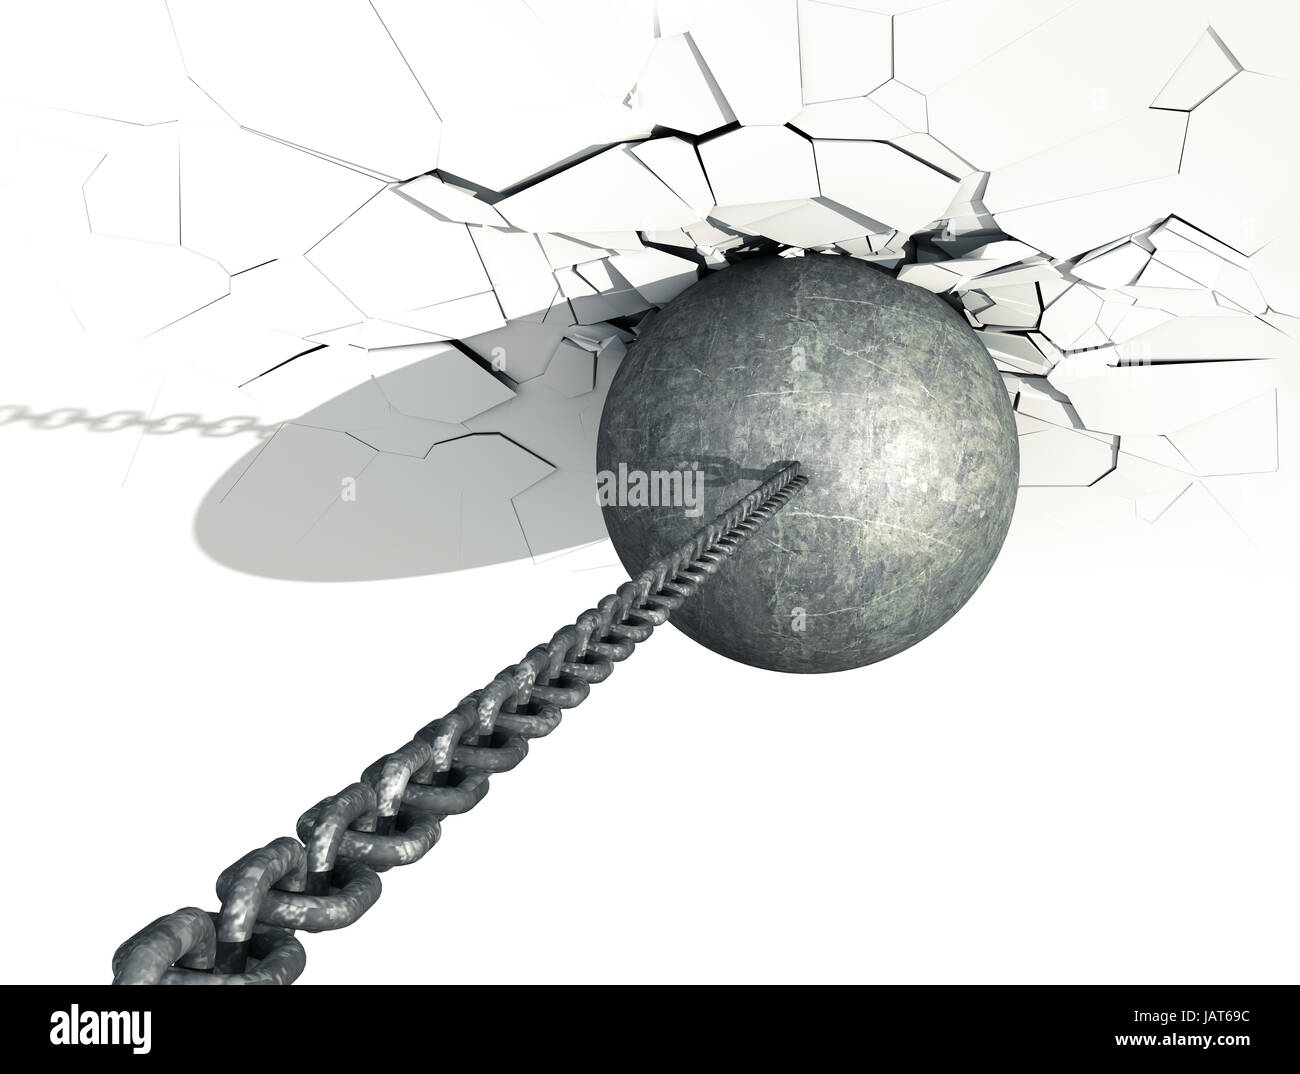 Wrecking Ball Shattering Wall. Top view. 3D Illustration Stock Photo